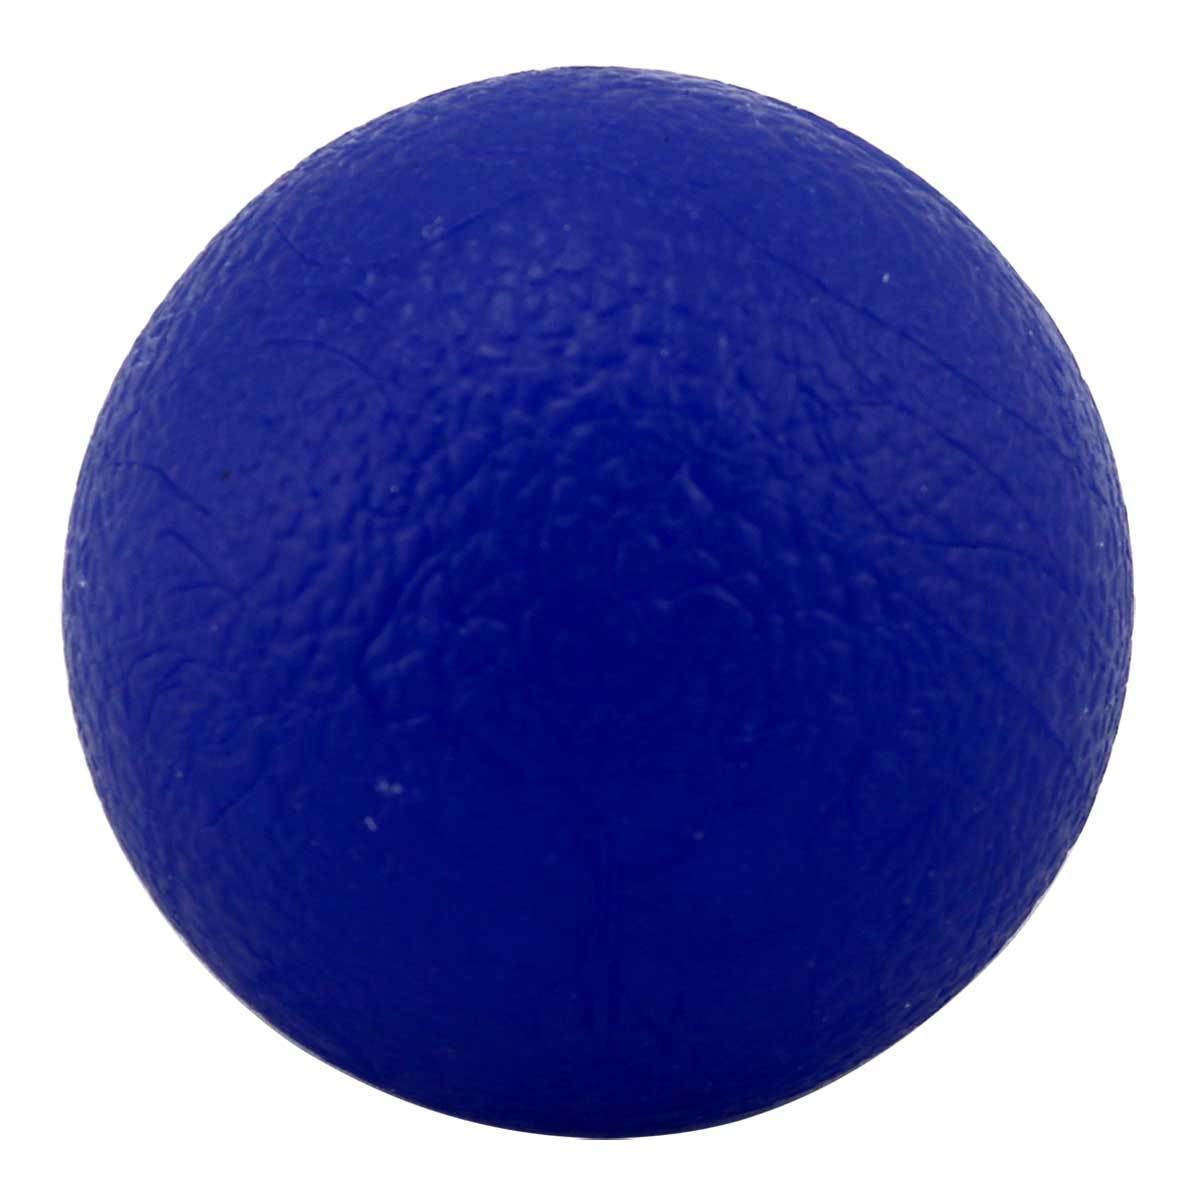 Wholesale Therafit Hand Therapy Balls